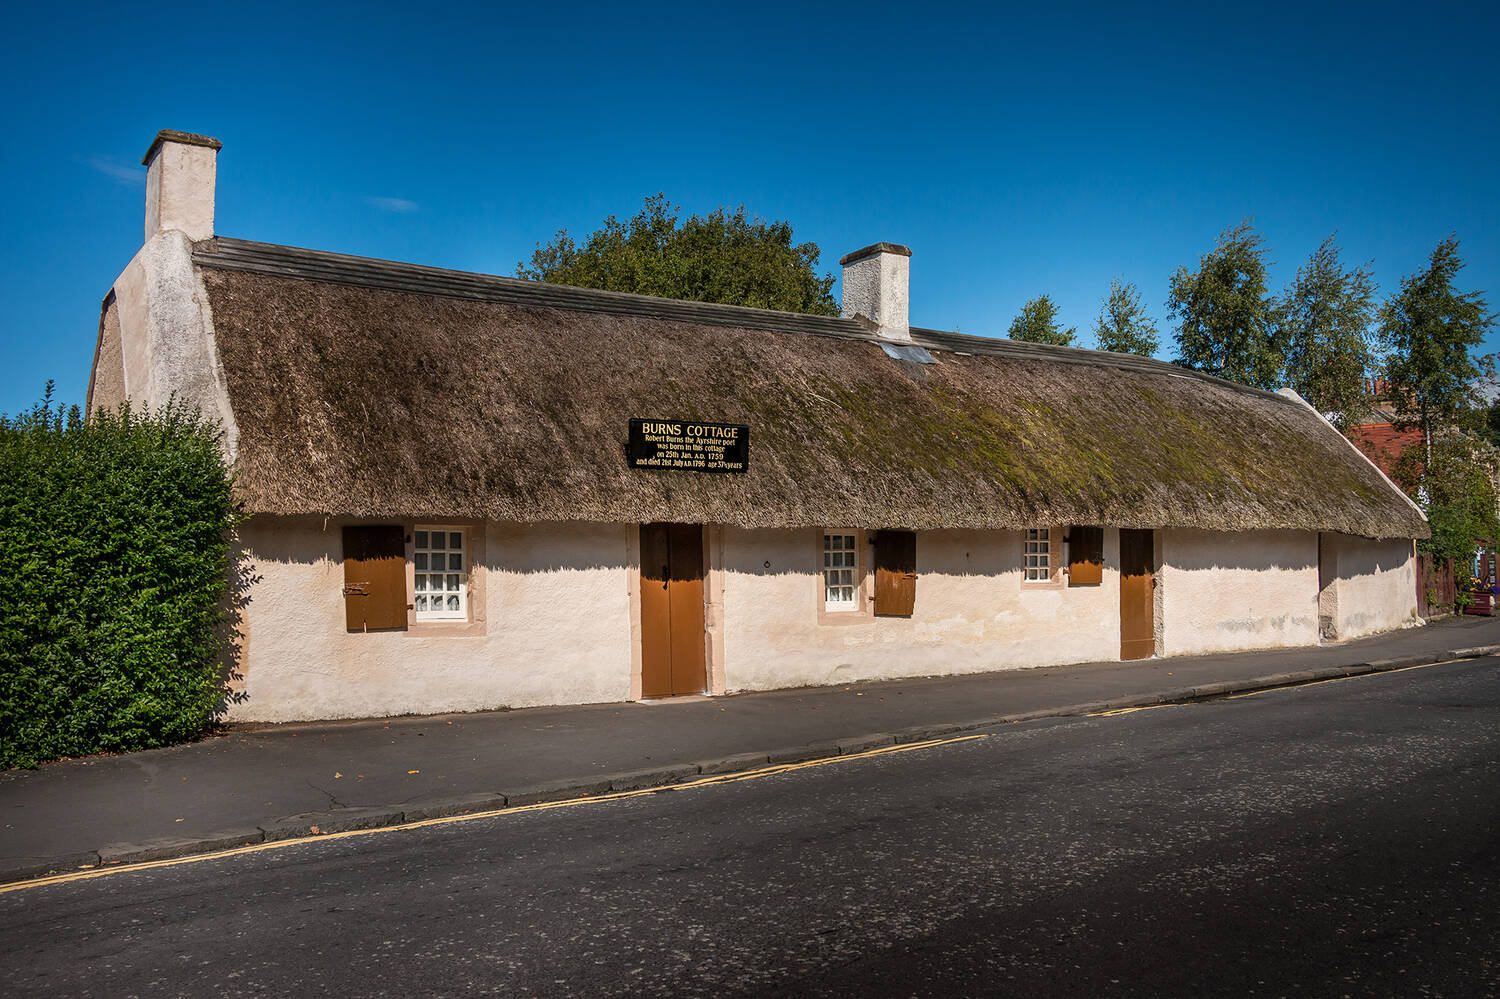 A view of the exterior of Burns Cottage, a single-storey long cottage with white stone walls and a thatched roof. A road passes directly in front of it. The sky is a bright blue behind.